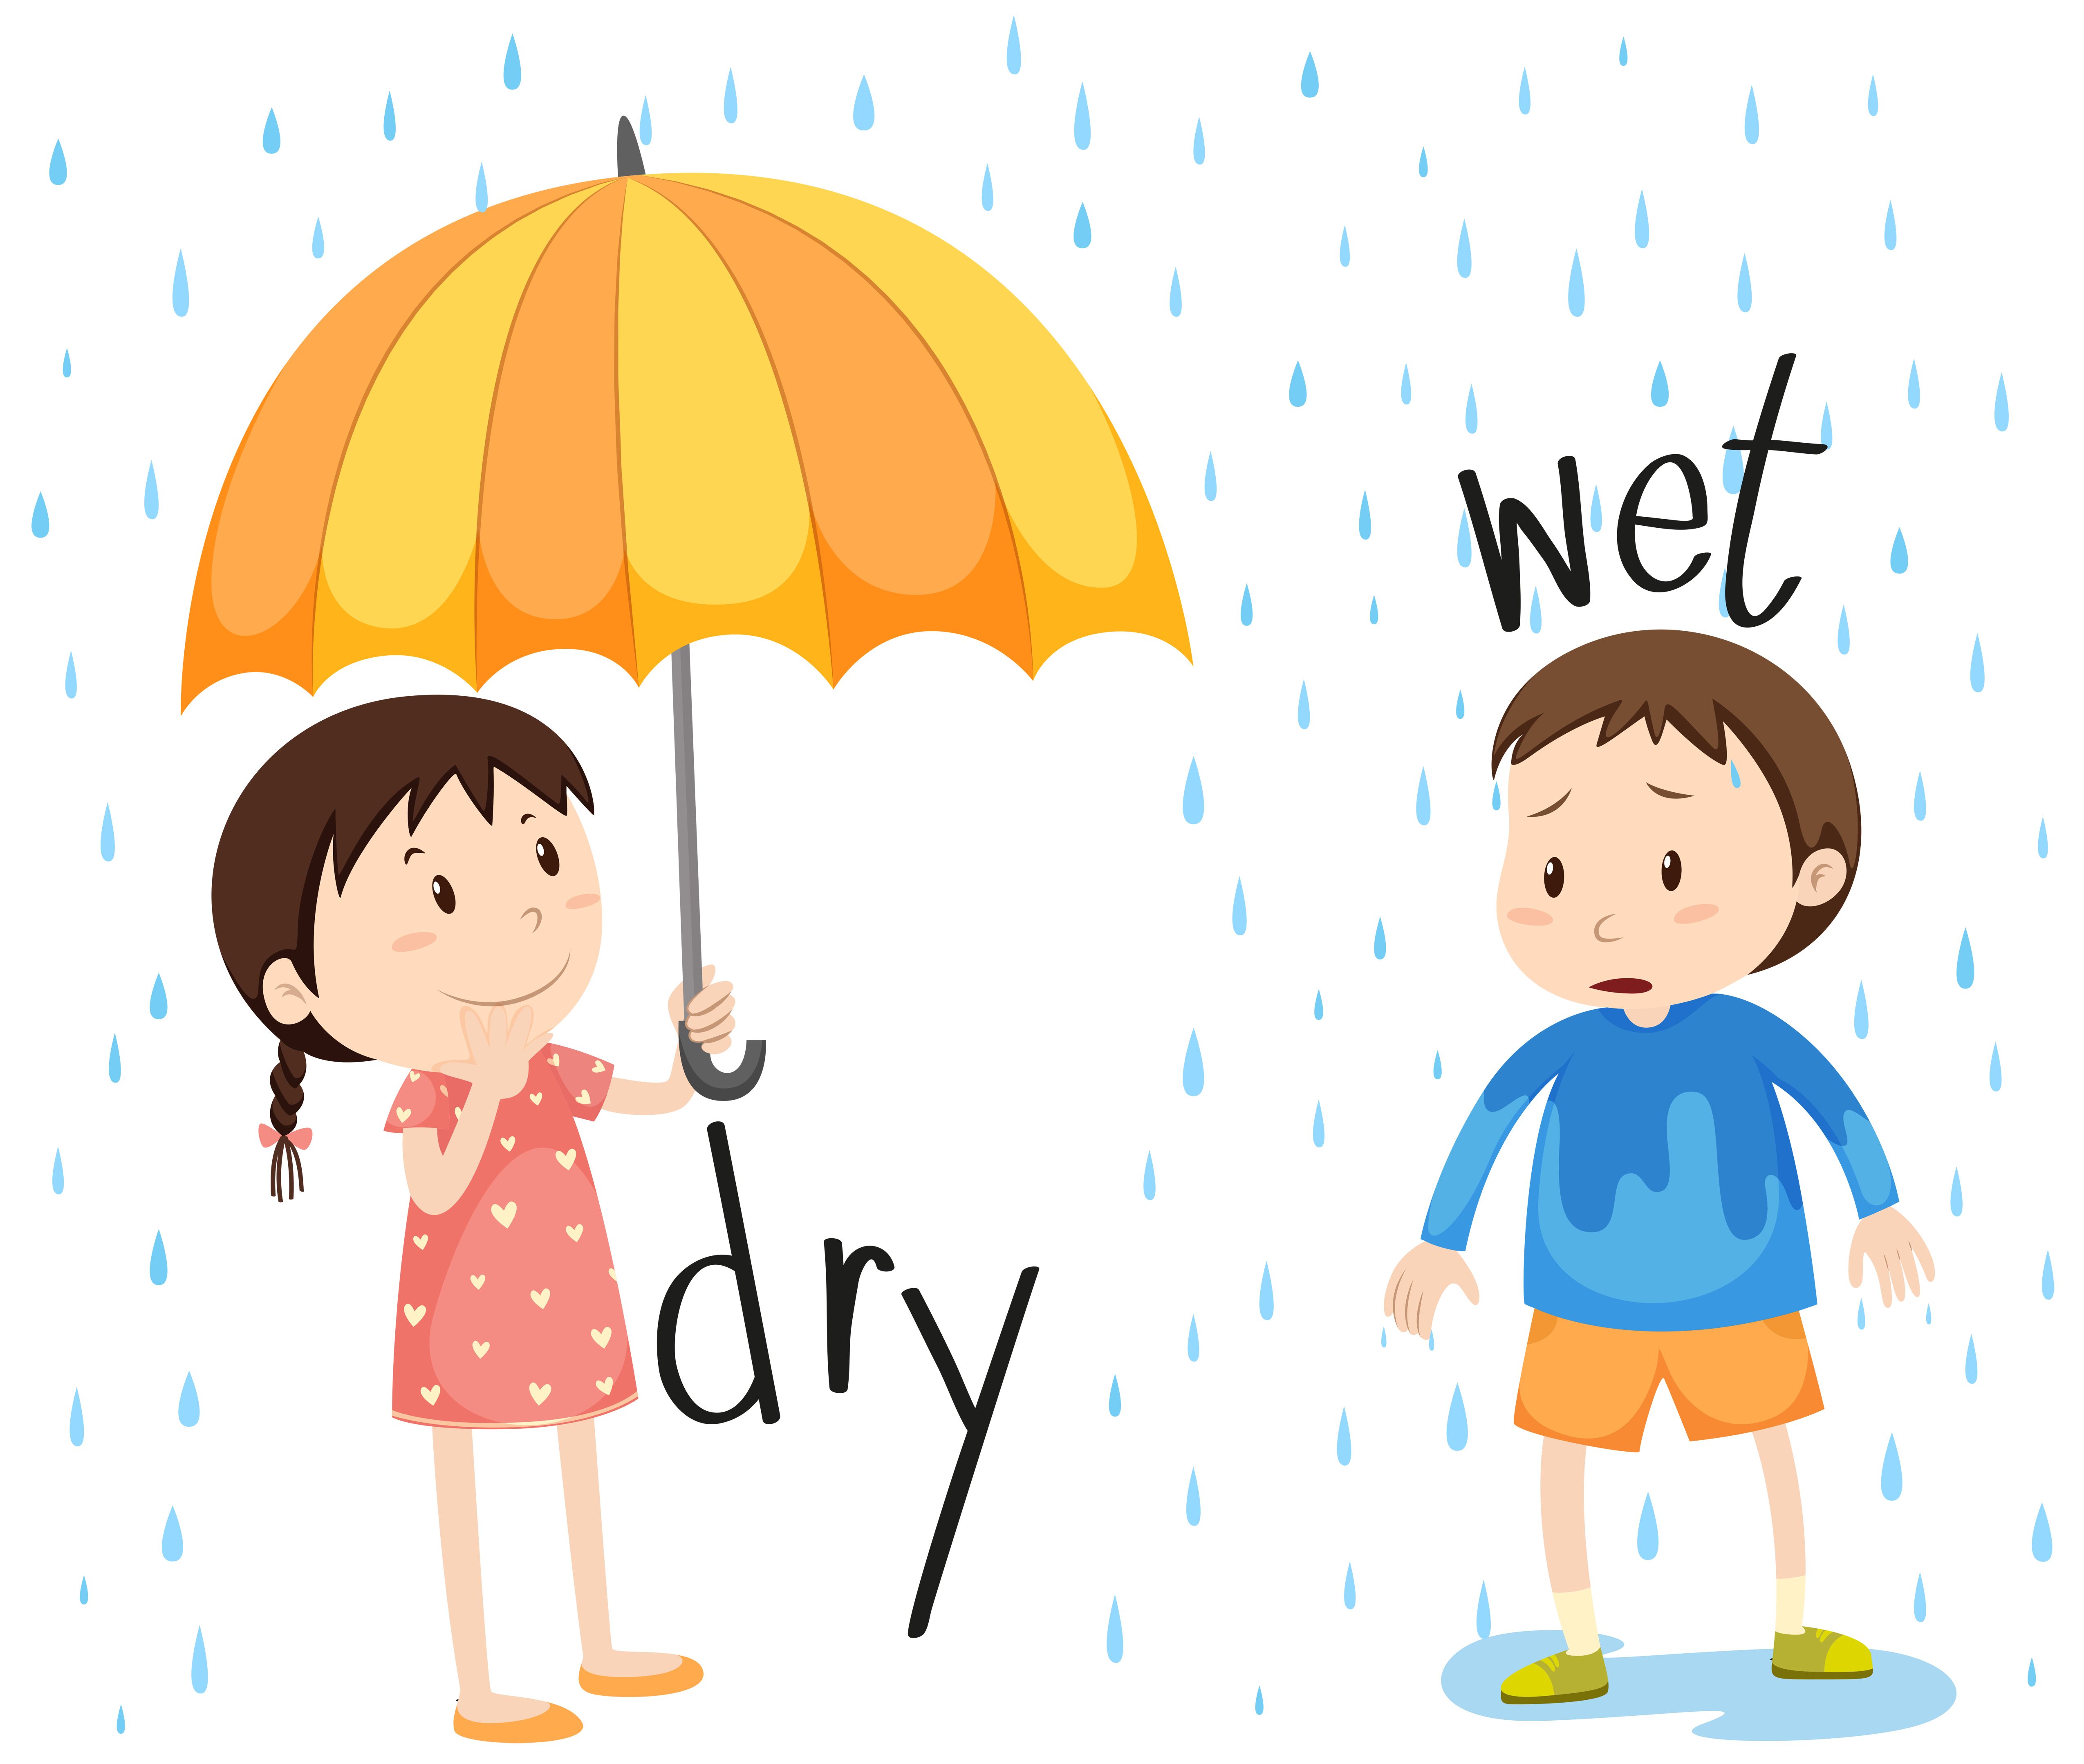 Wet clipart dirty child, Wet dirty child Transparent FREE.